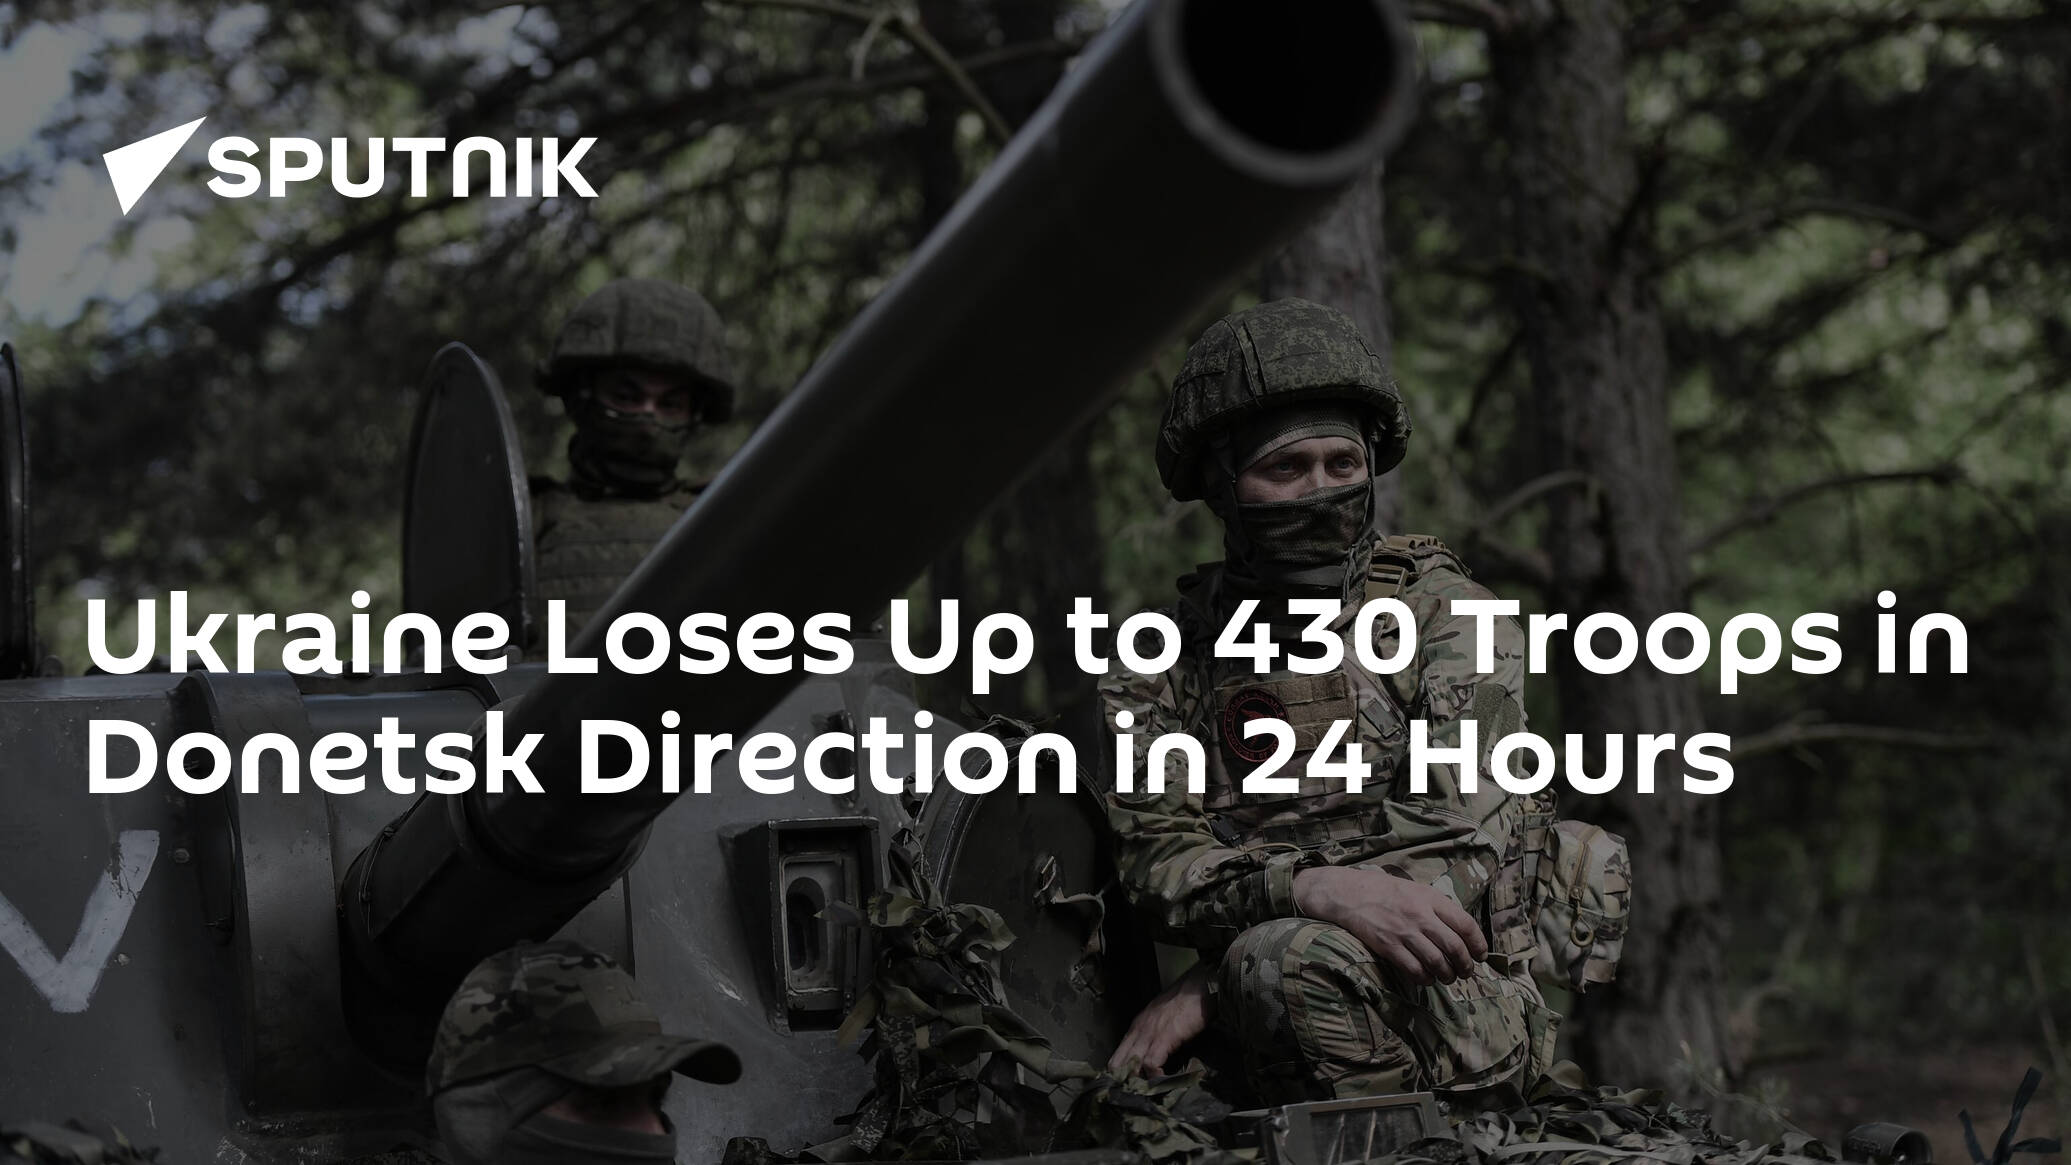 Ukraine Loses Up to 430 Troops in Donetsk Direction in 24 Hours